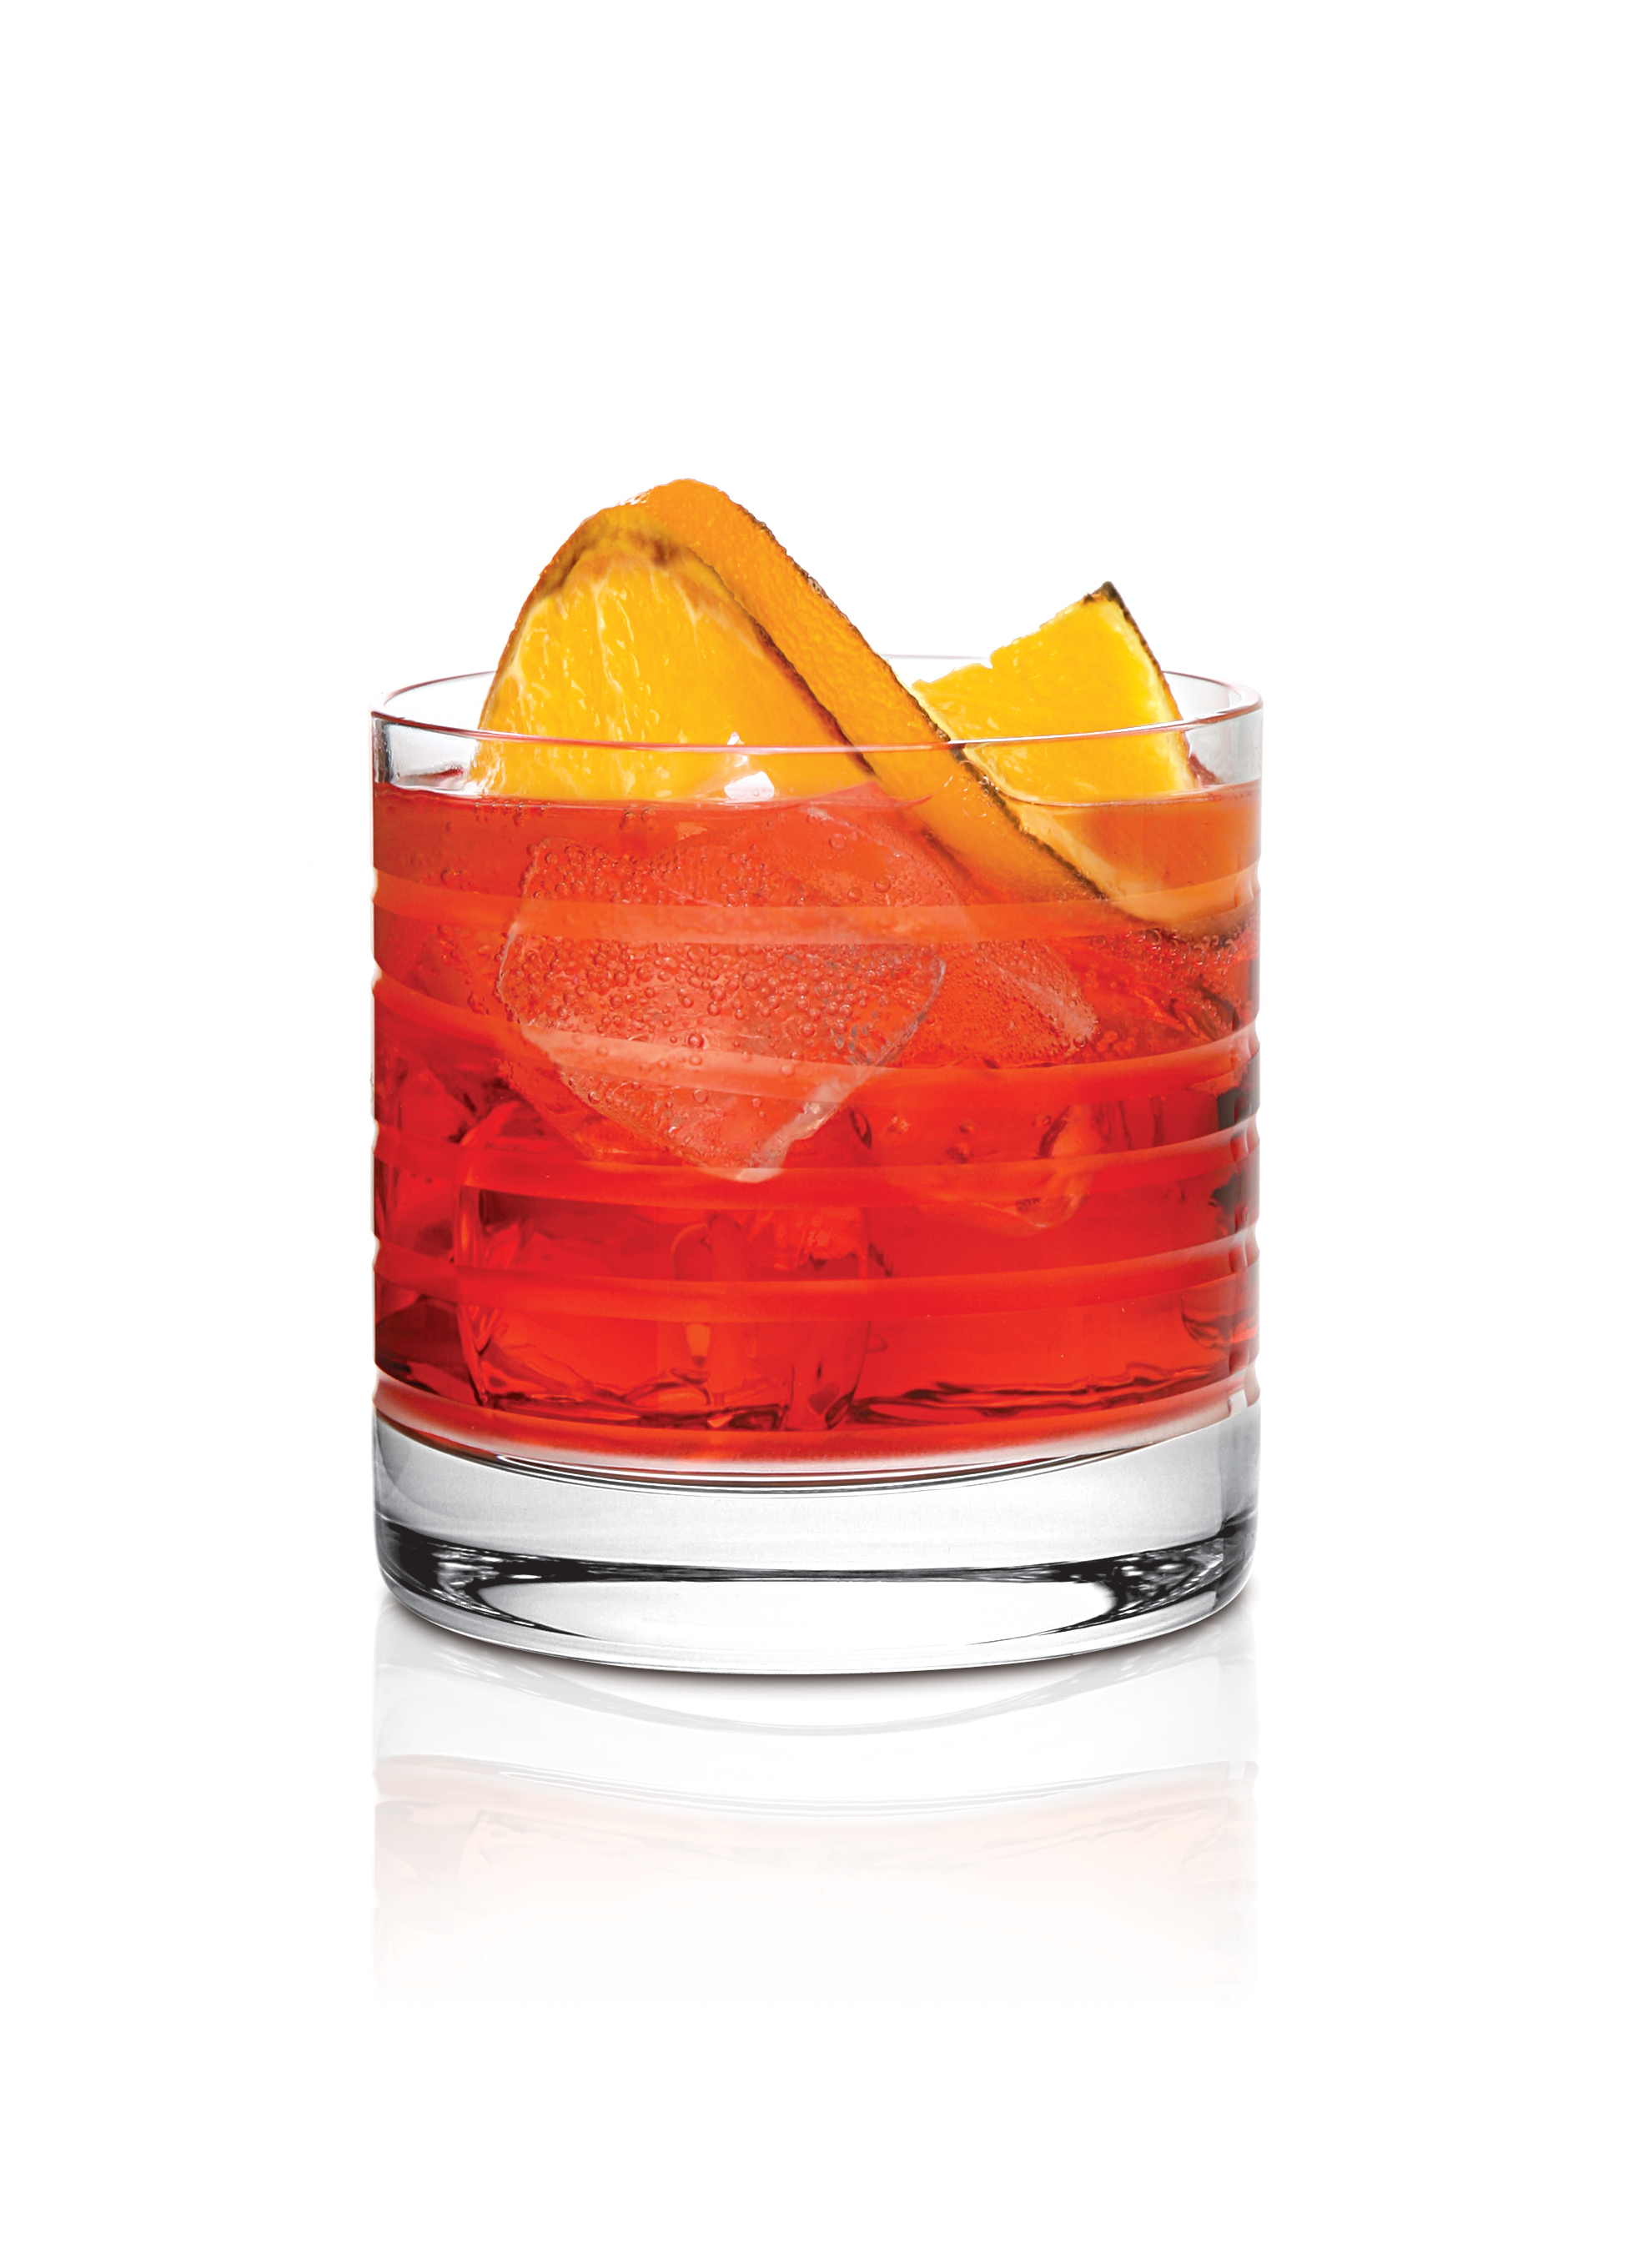 Cocktail Drink Orange Negroni Photo And Picture Sharing